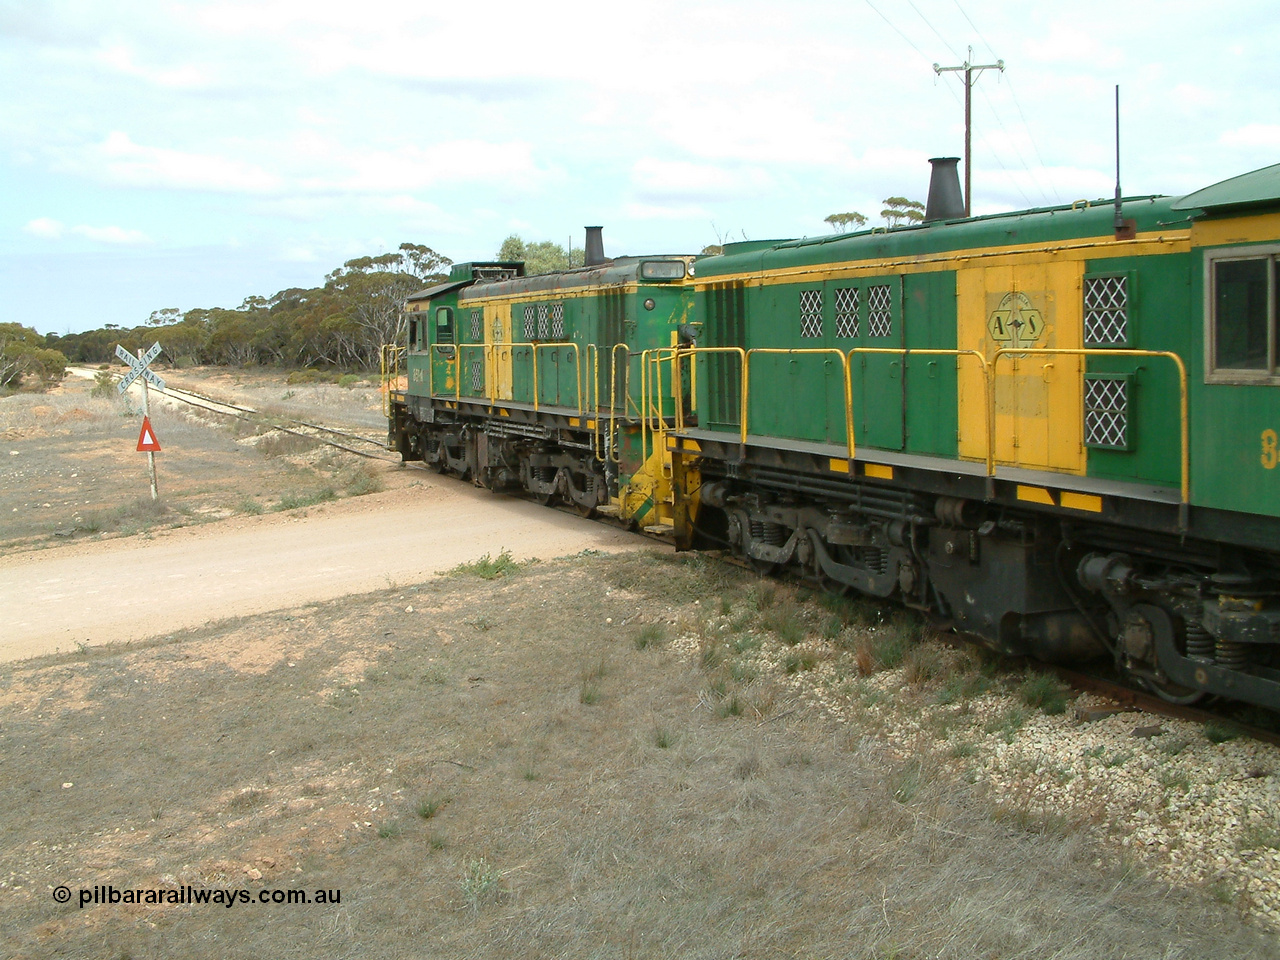 030409 115610
Darke Peake, at the 195 km Dog Fence Road grade crossing loaded grain train with 830 class unit 851 AE Goodwin ALCo model DL531 serial 84137, 851 has spent its entire operating career on the Eyre Peninsula, leads fellow 830 class 842 serial 84140 and a rebuilt unit DA 4, rebuilt from 830 class unit 839 by Port Augusta Workshops, retains original serial 83730 and model DL531 with the first twelve waggons behind the locos XNW type.
Keywords: 830-class;851;84137;AE-Goodwin;ALCo;DL531;